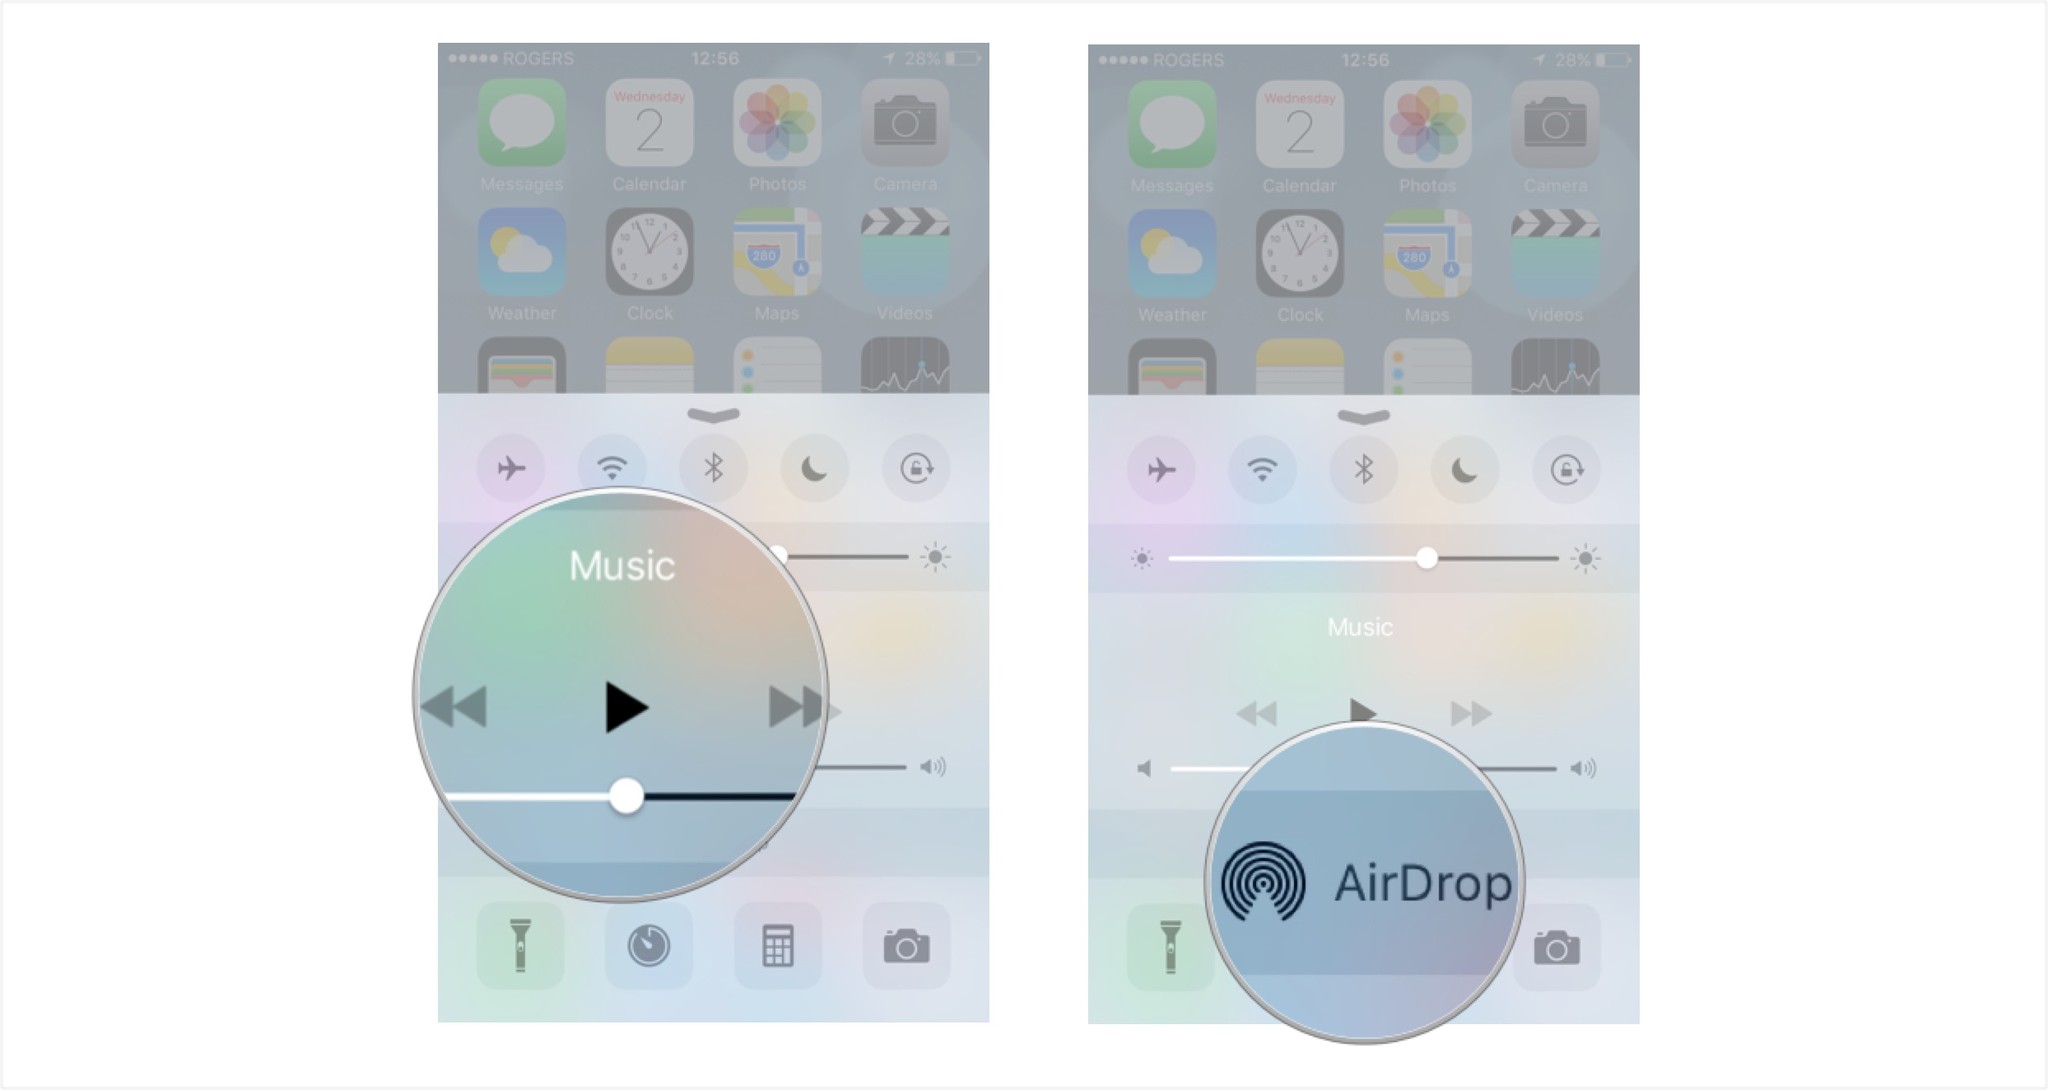 Use the media playback controls or tap on AirDrop